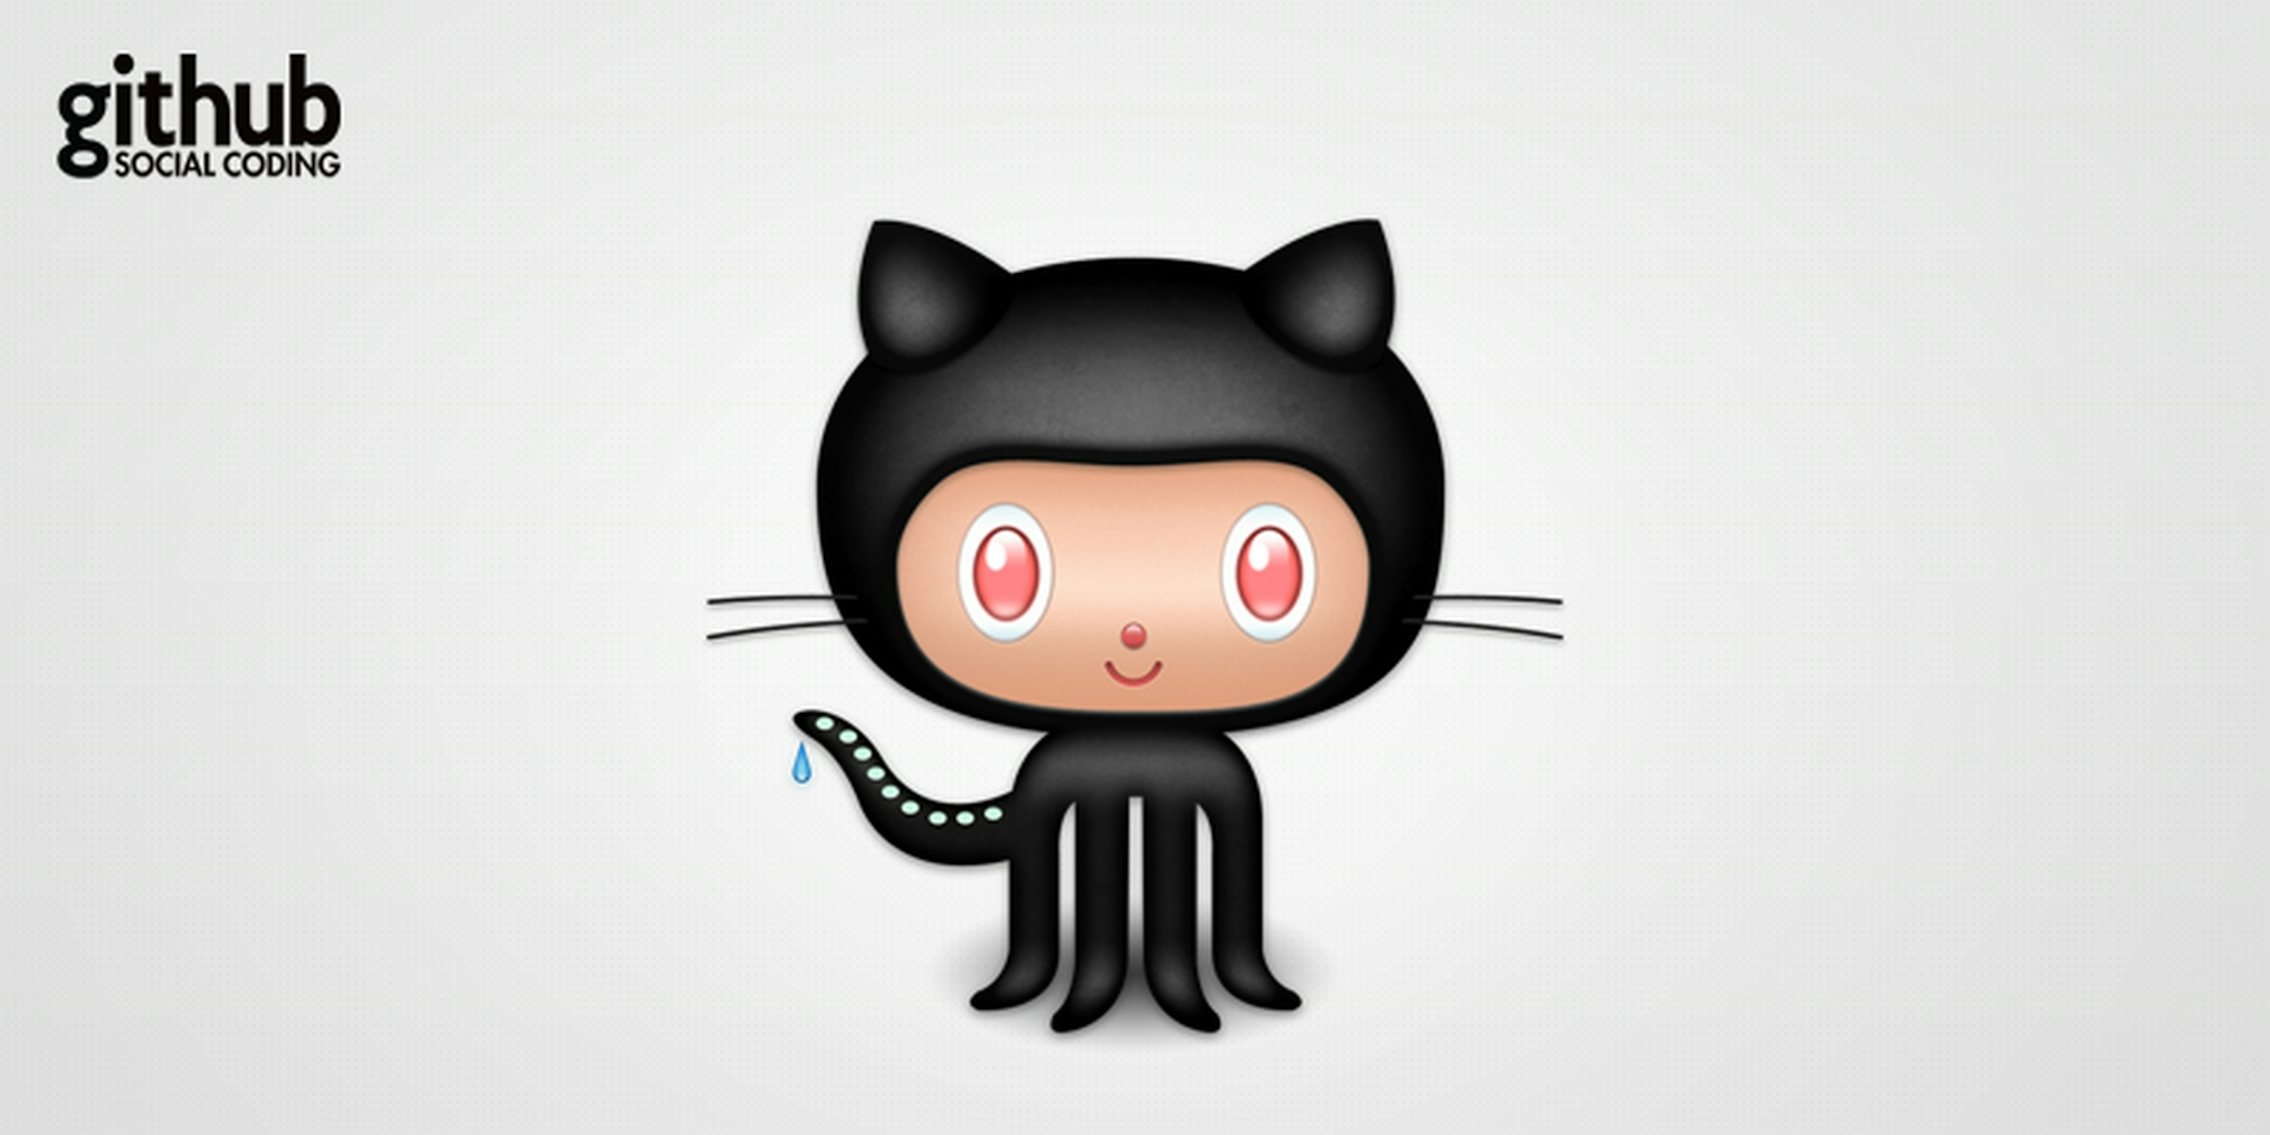 Github Reveals Details Of Third Party Investigation Into Sexism Charges The Daily Dot